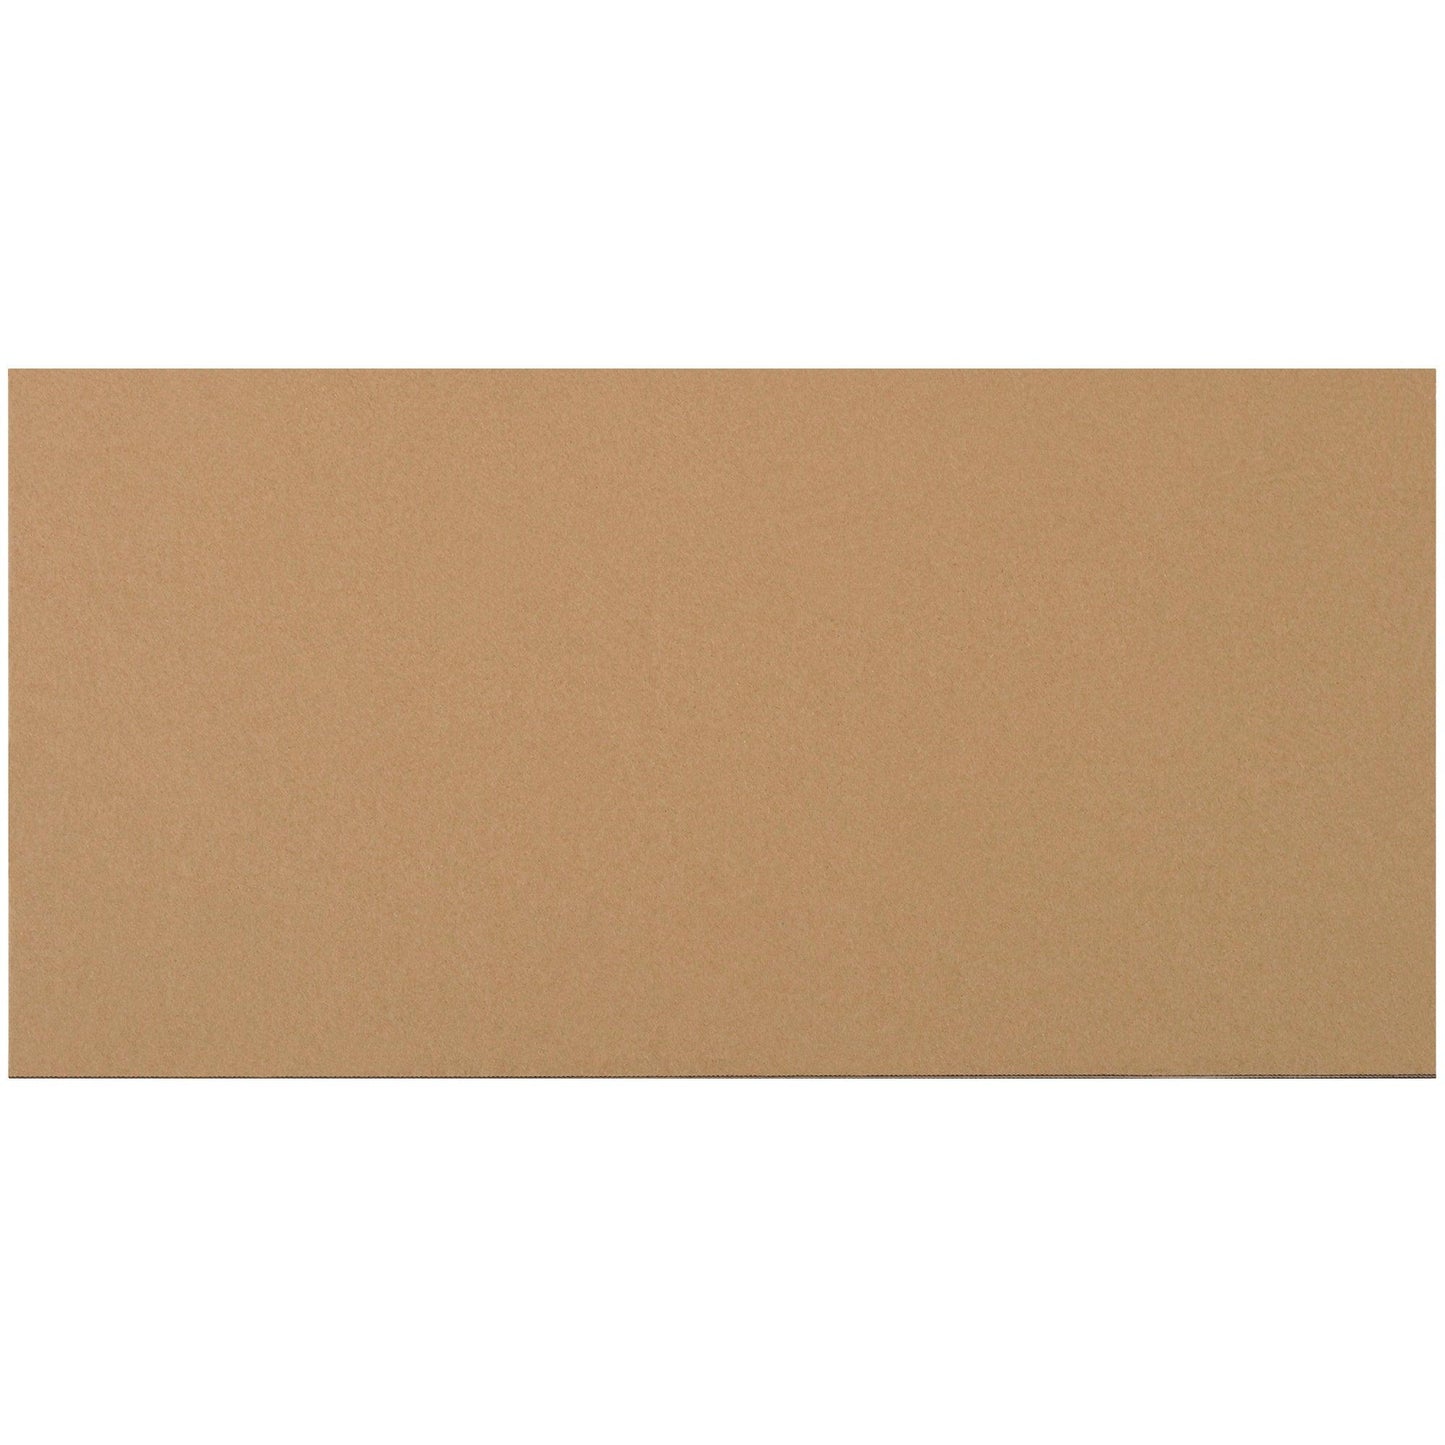 11 7/8 x 23 7/8" Corrugated Layer Pads - SP1123